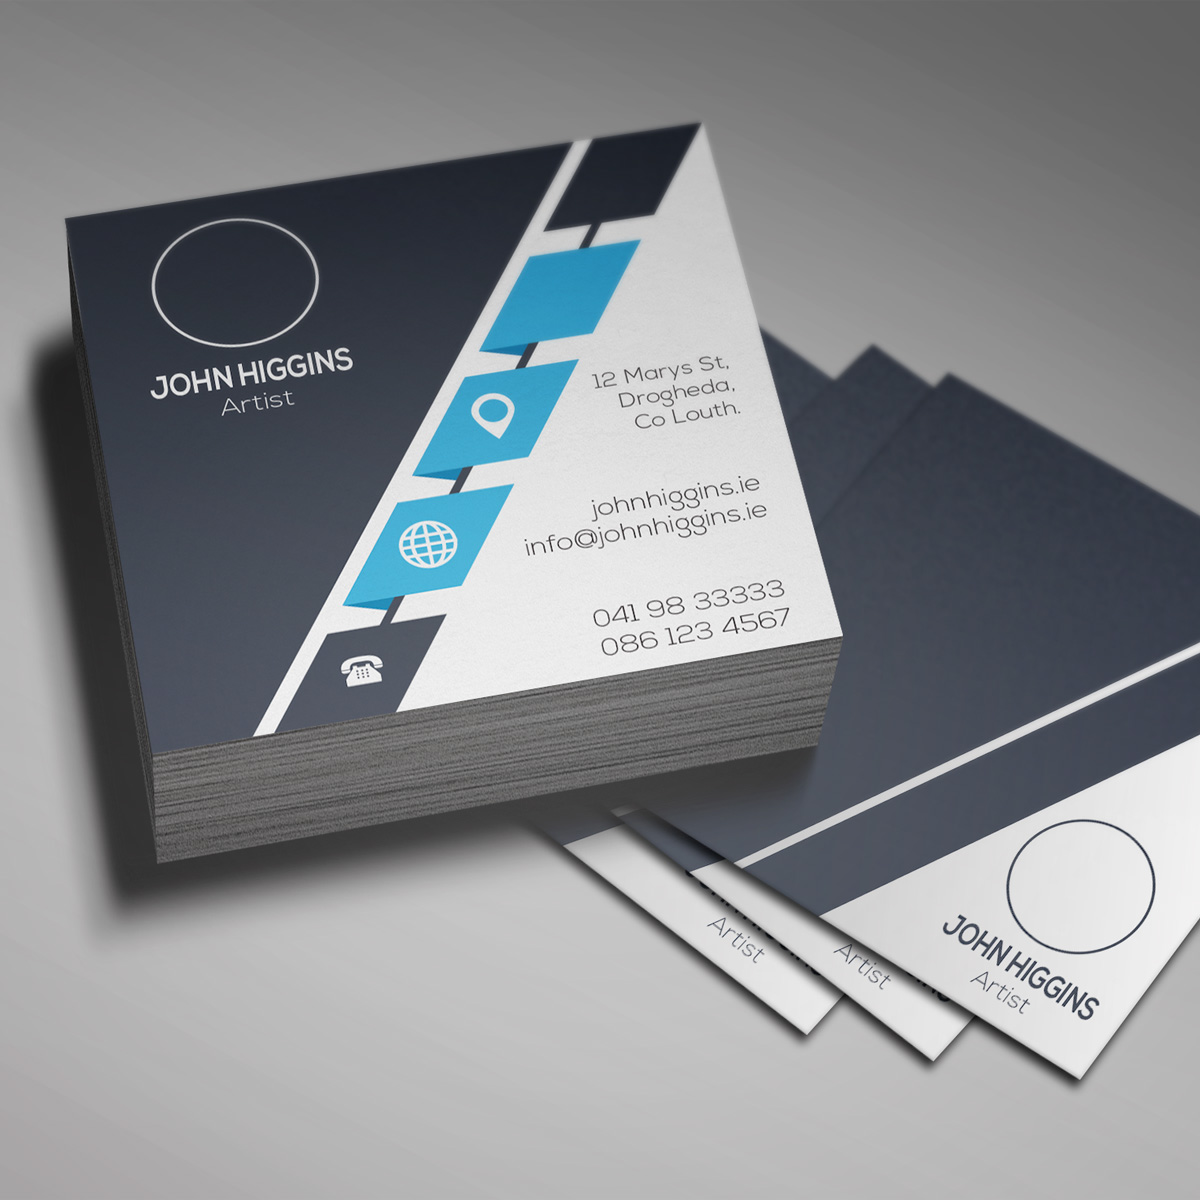 3x3 business cards 1